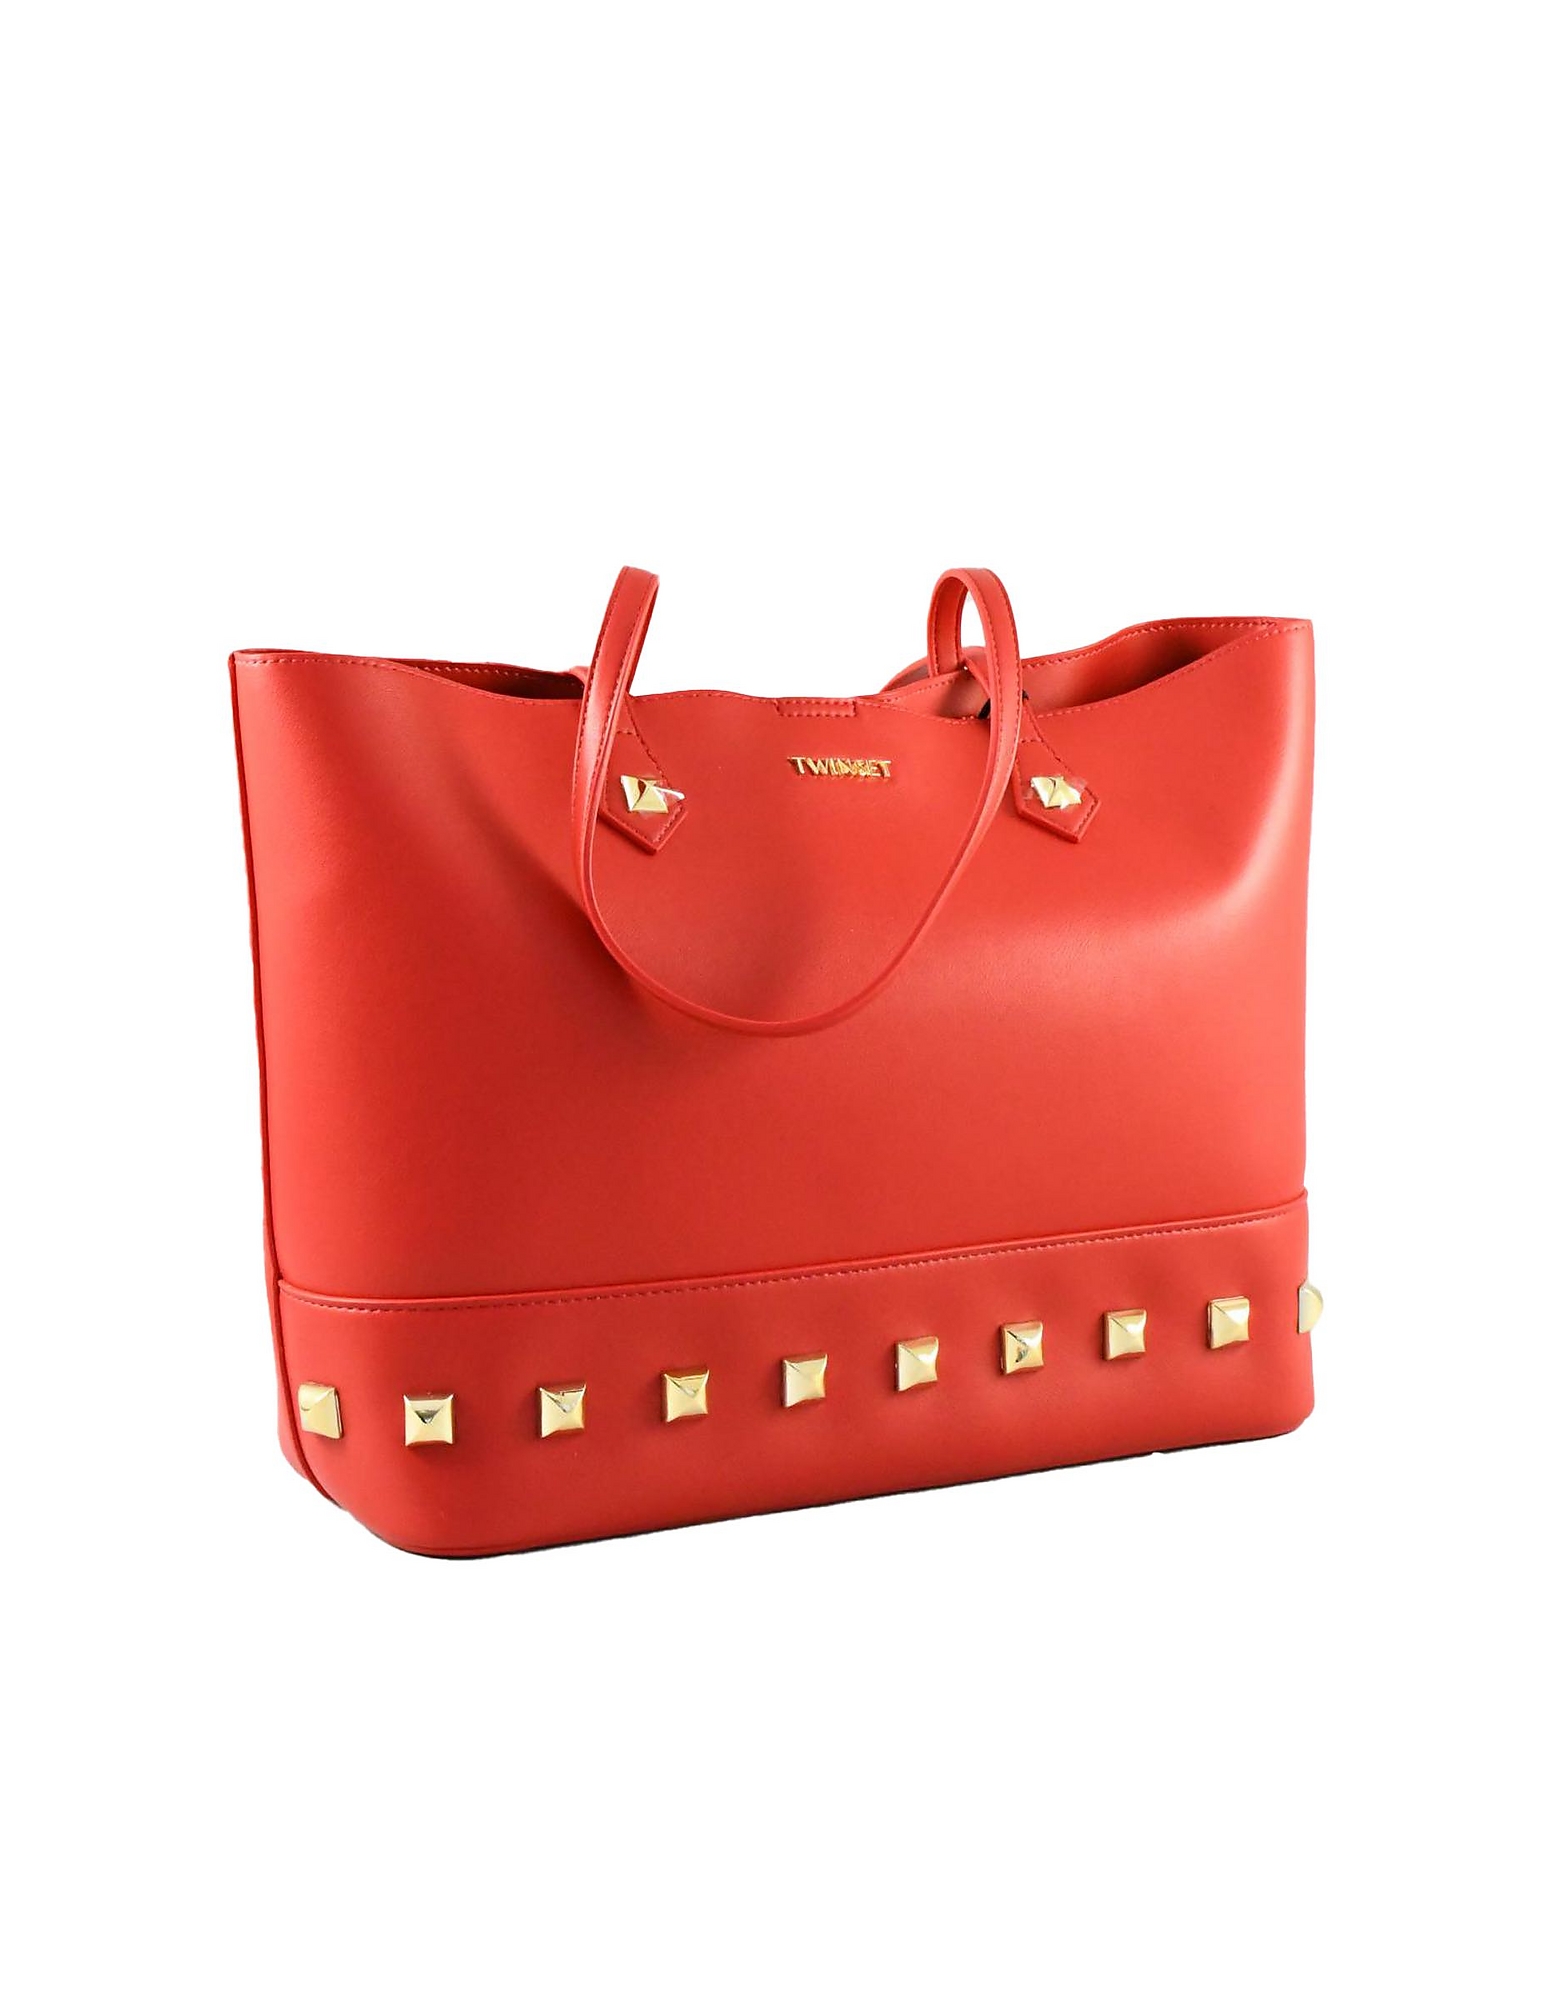 Twinset Womens Red Handbag In Rouge